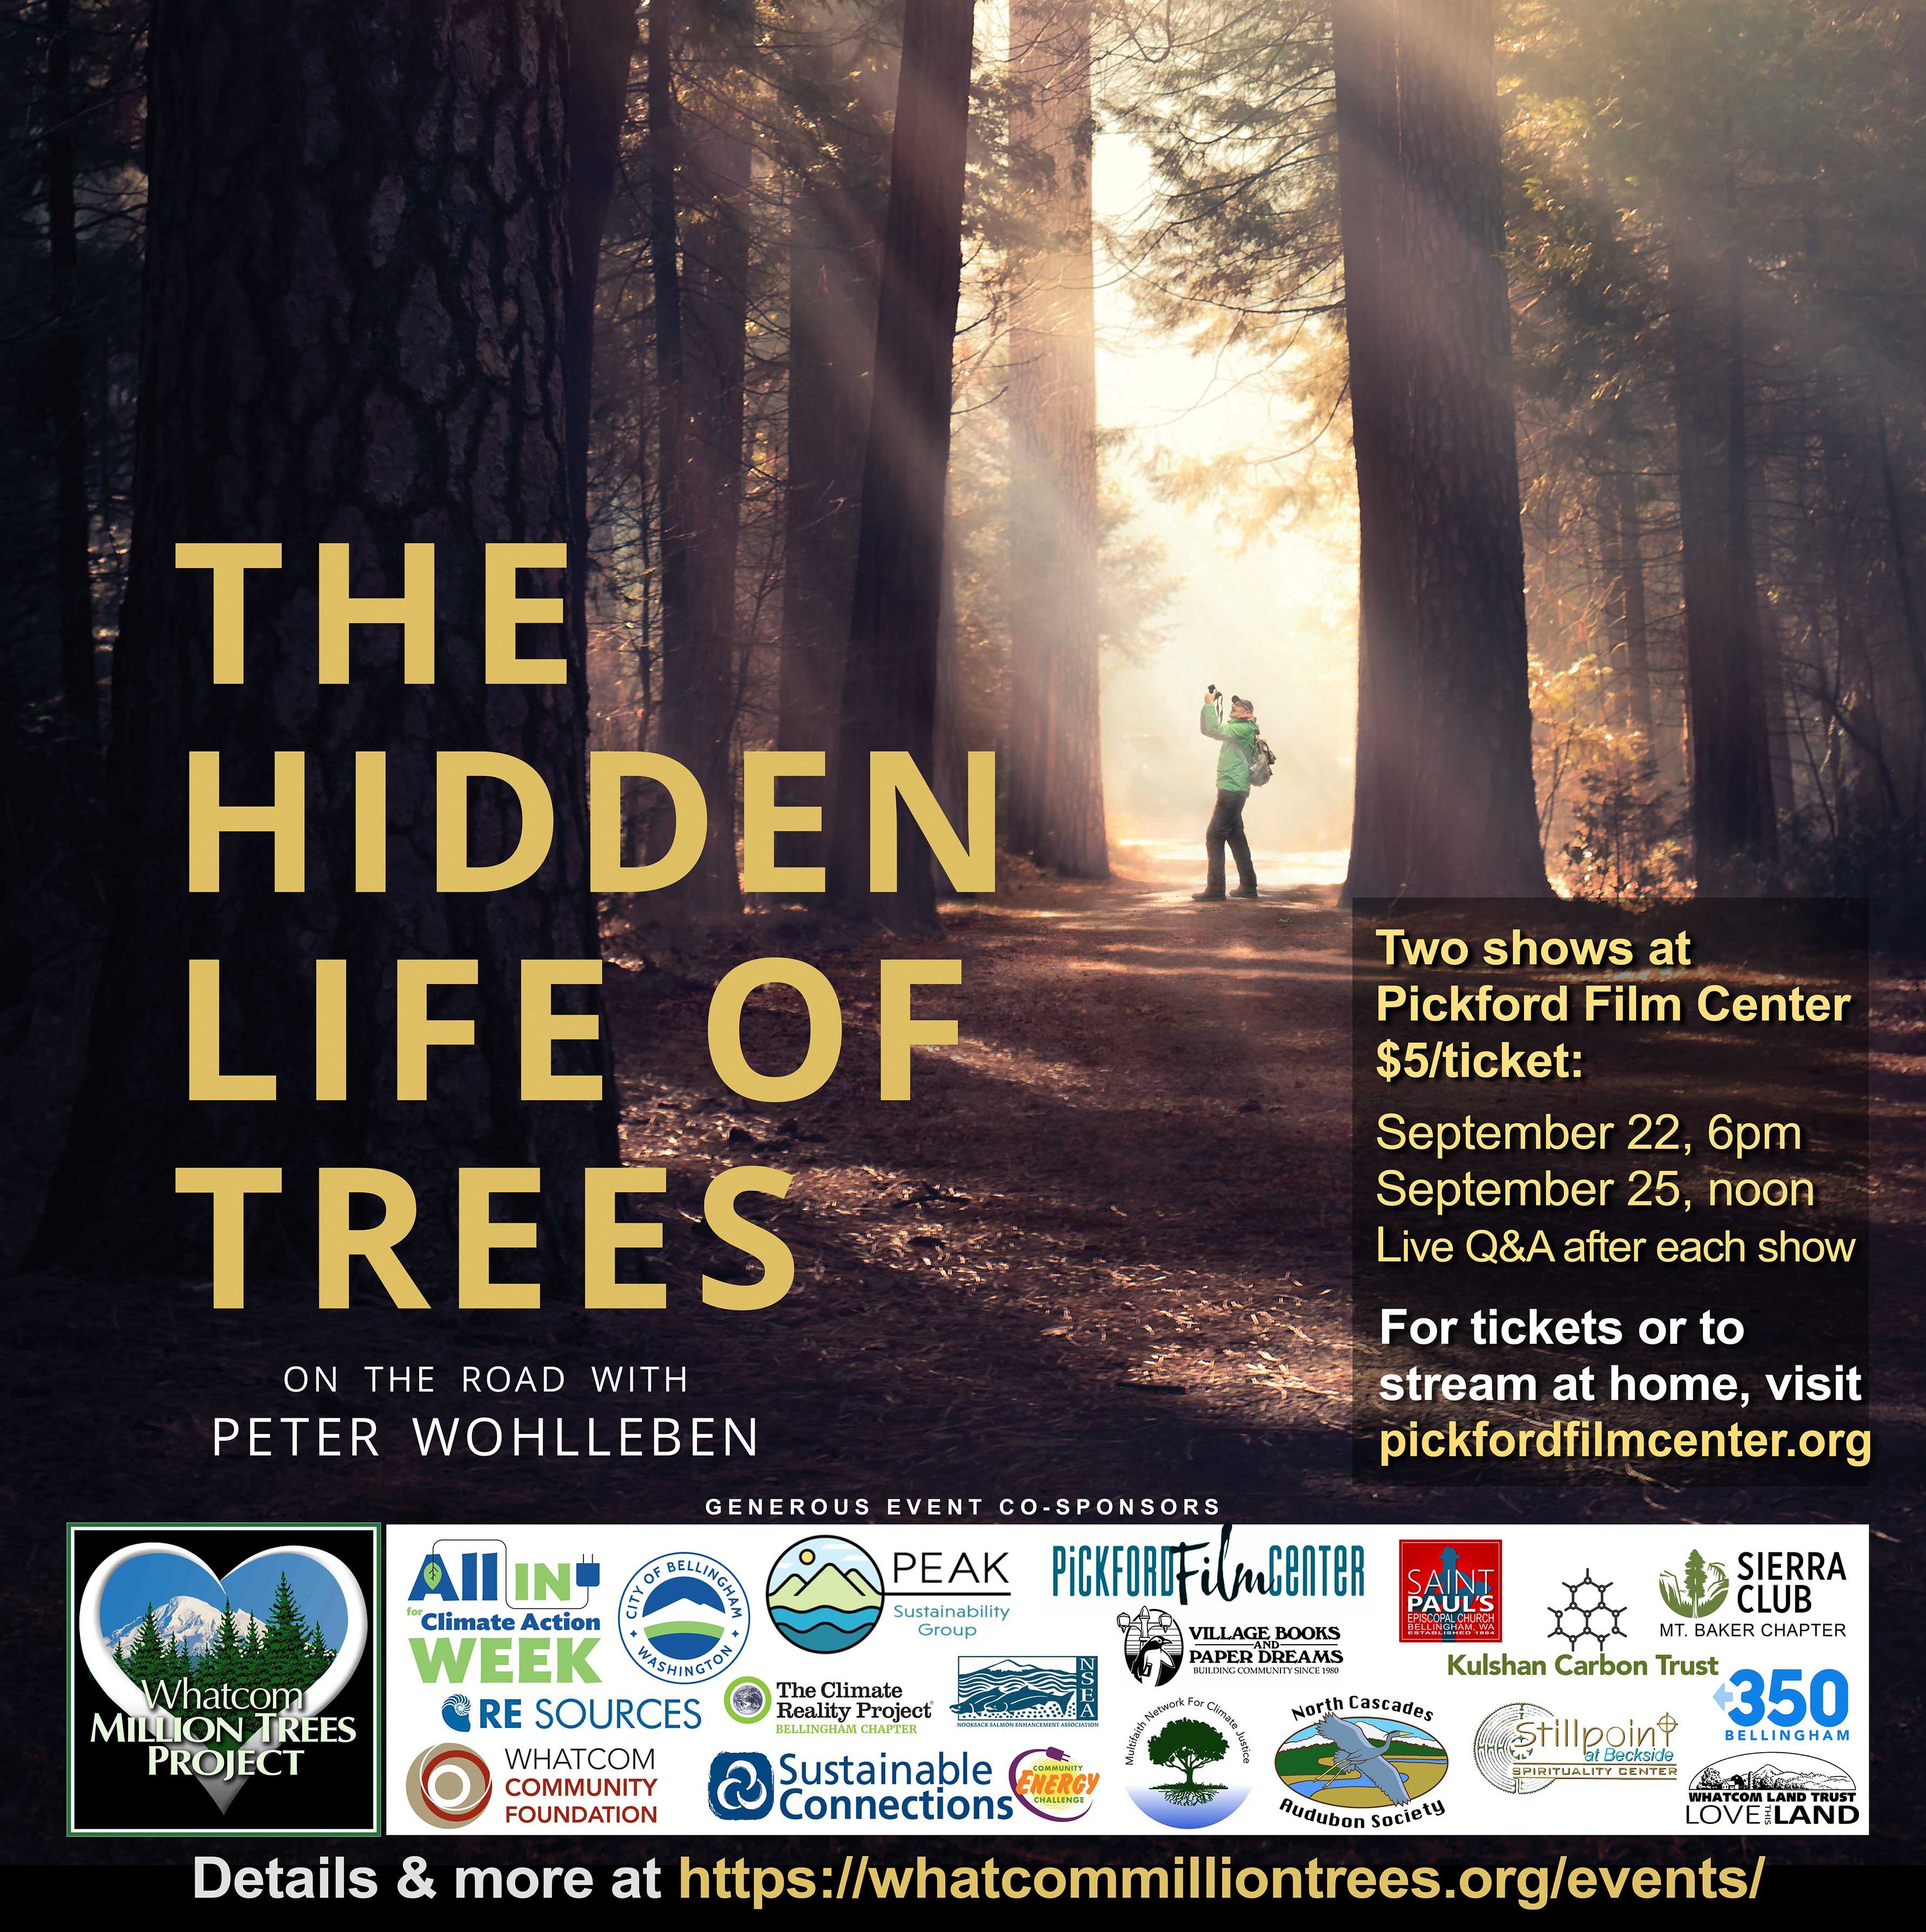 Film showing event poster for the Hidden Life of Trees showing a man standing in the forest with text overlay with information about the event.